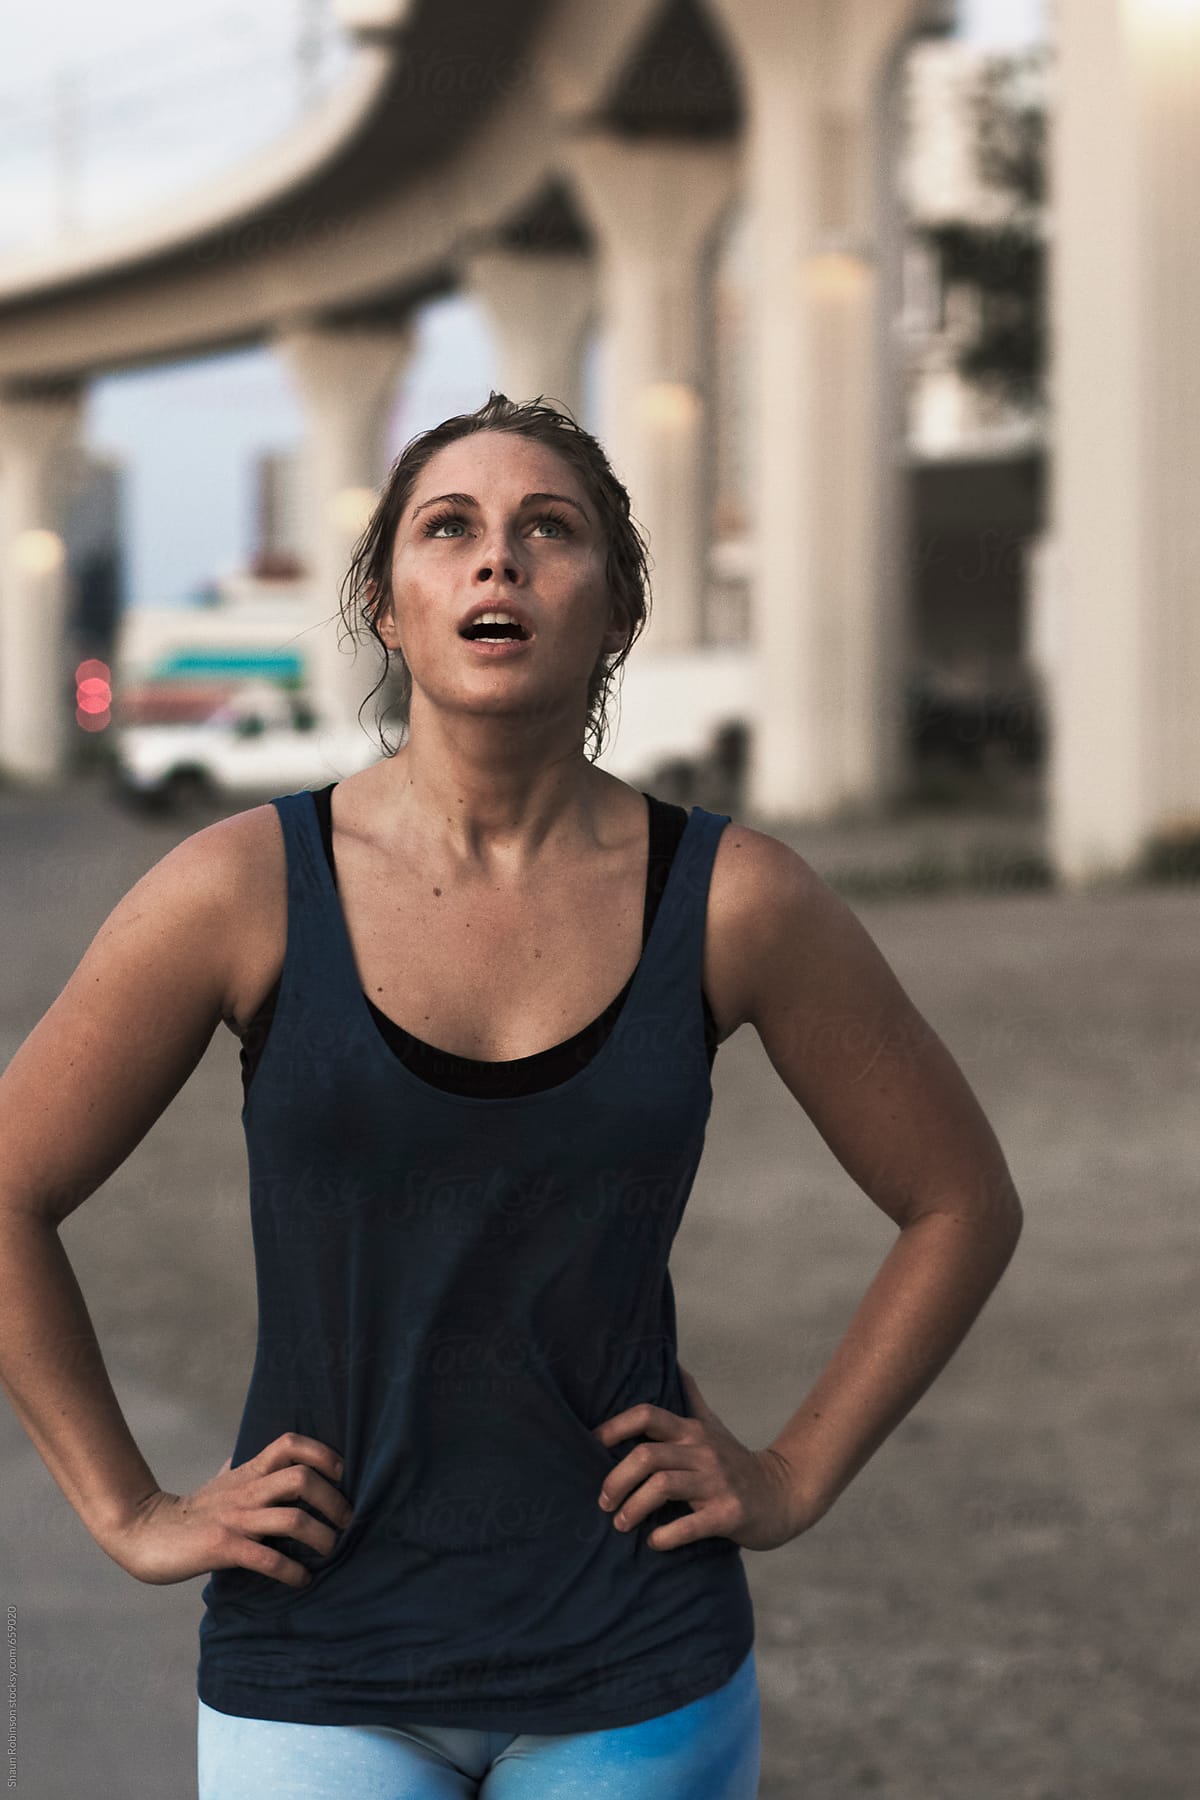 A fit woman catching her breath after running